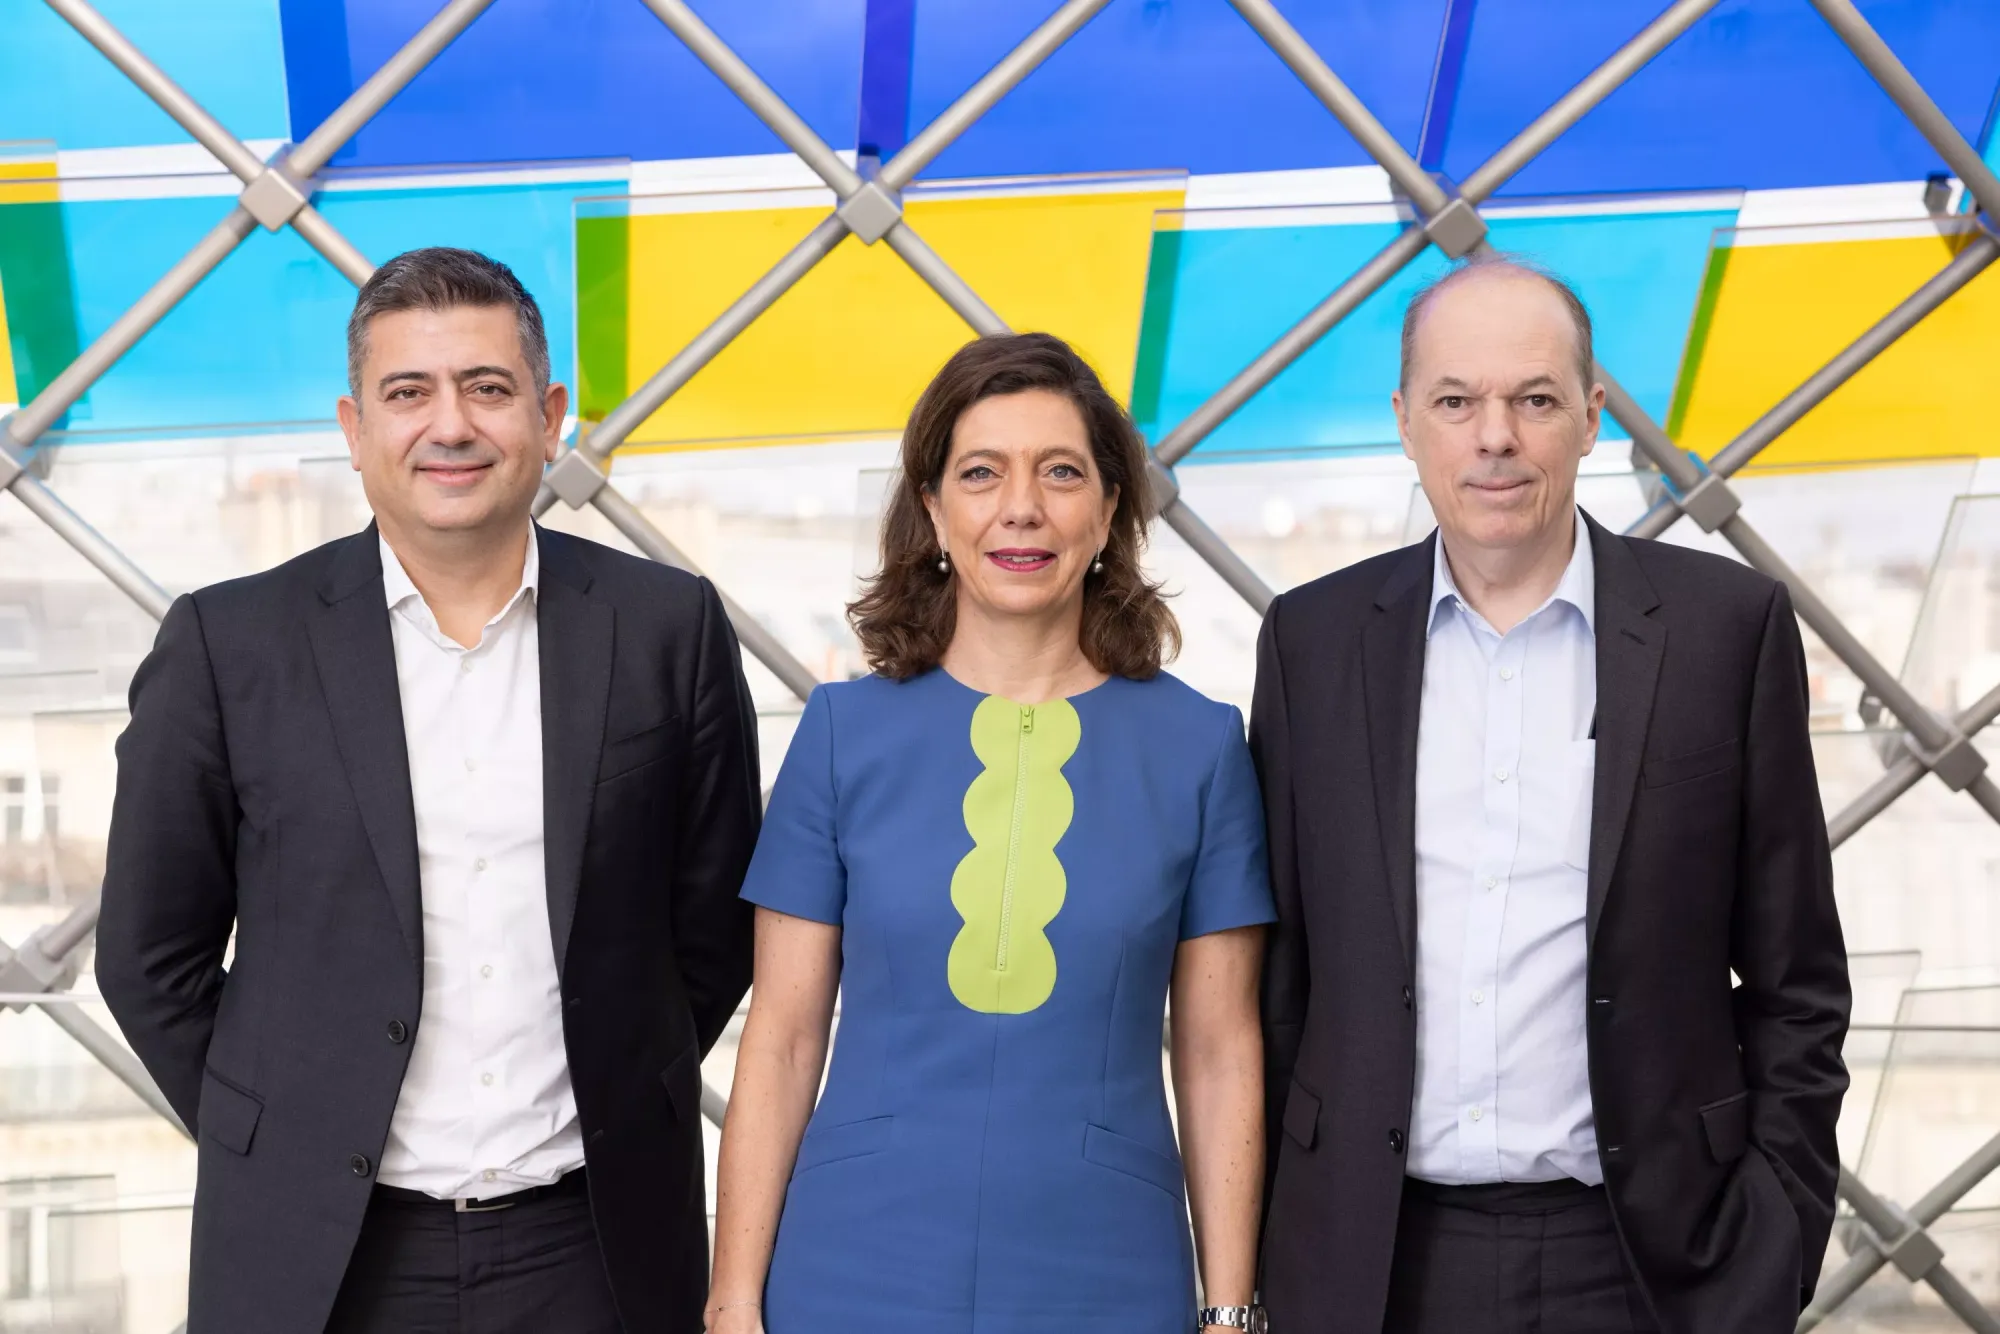 From left to right: Elaia Managing Partner Xavier Lazarus, Lazard Strategic Director Sophie de Nadaillac, and Lazard CEO François-Marc Durand.